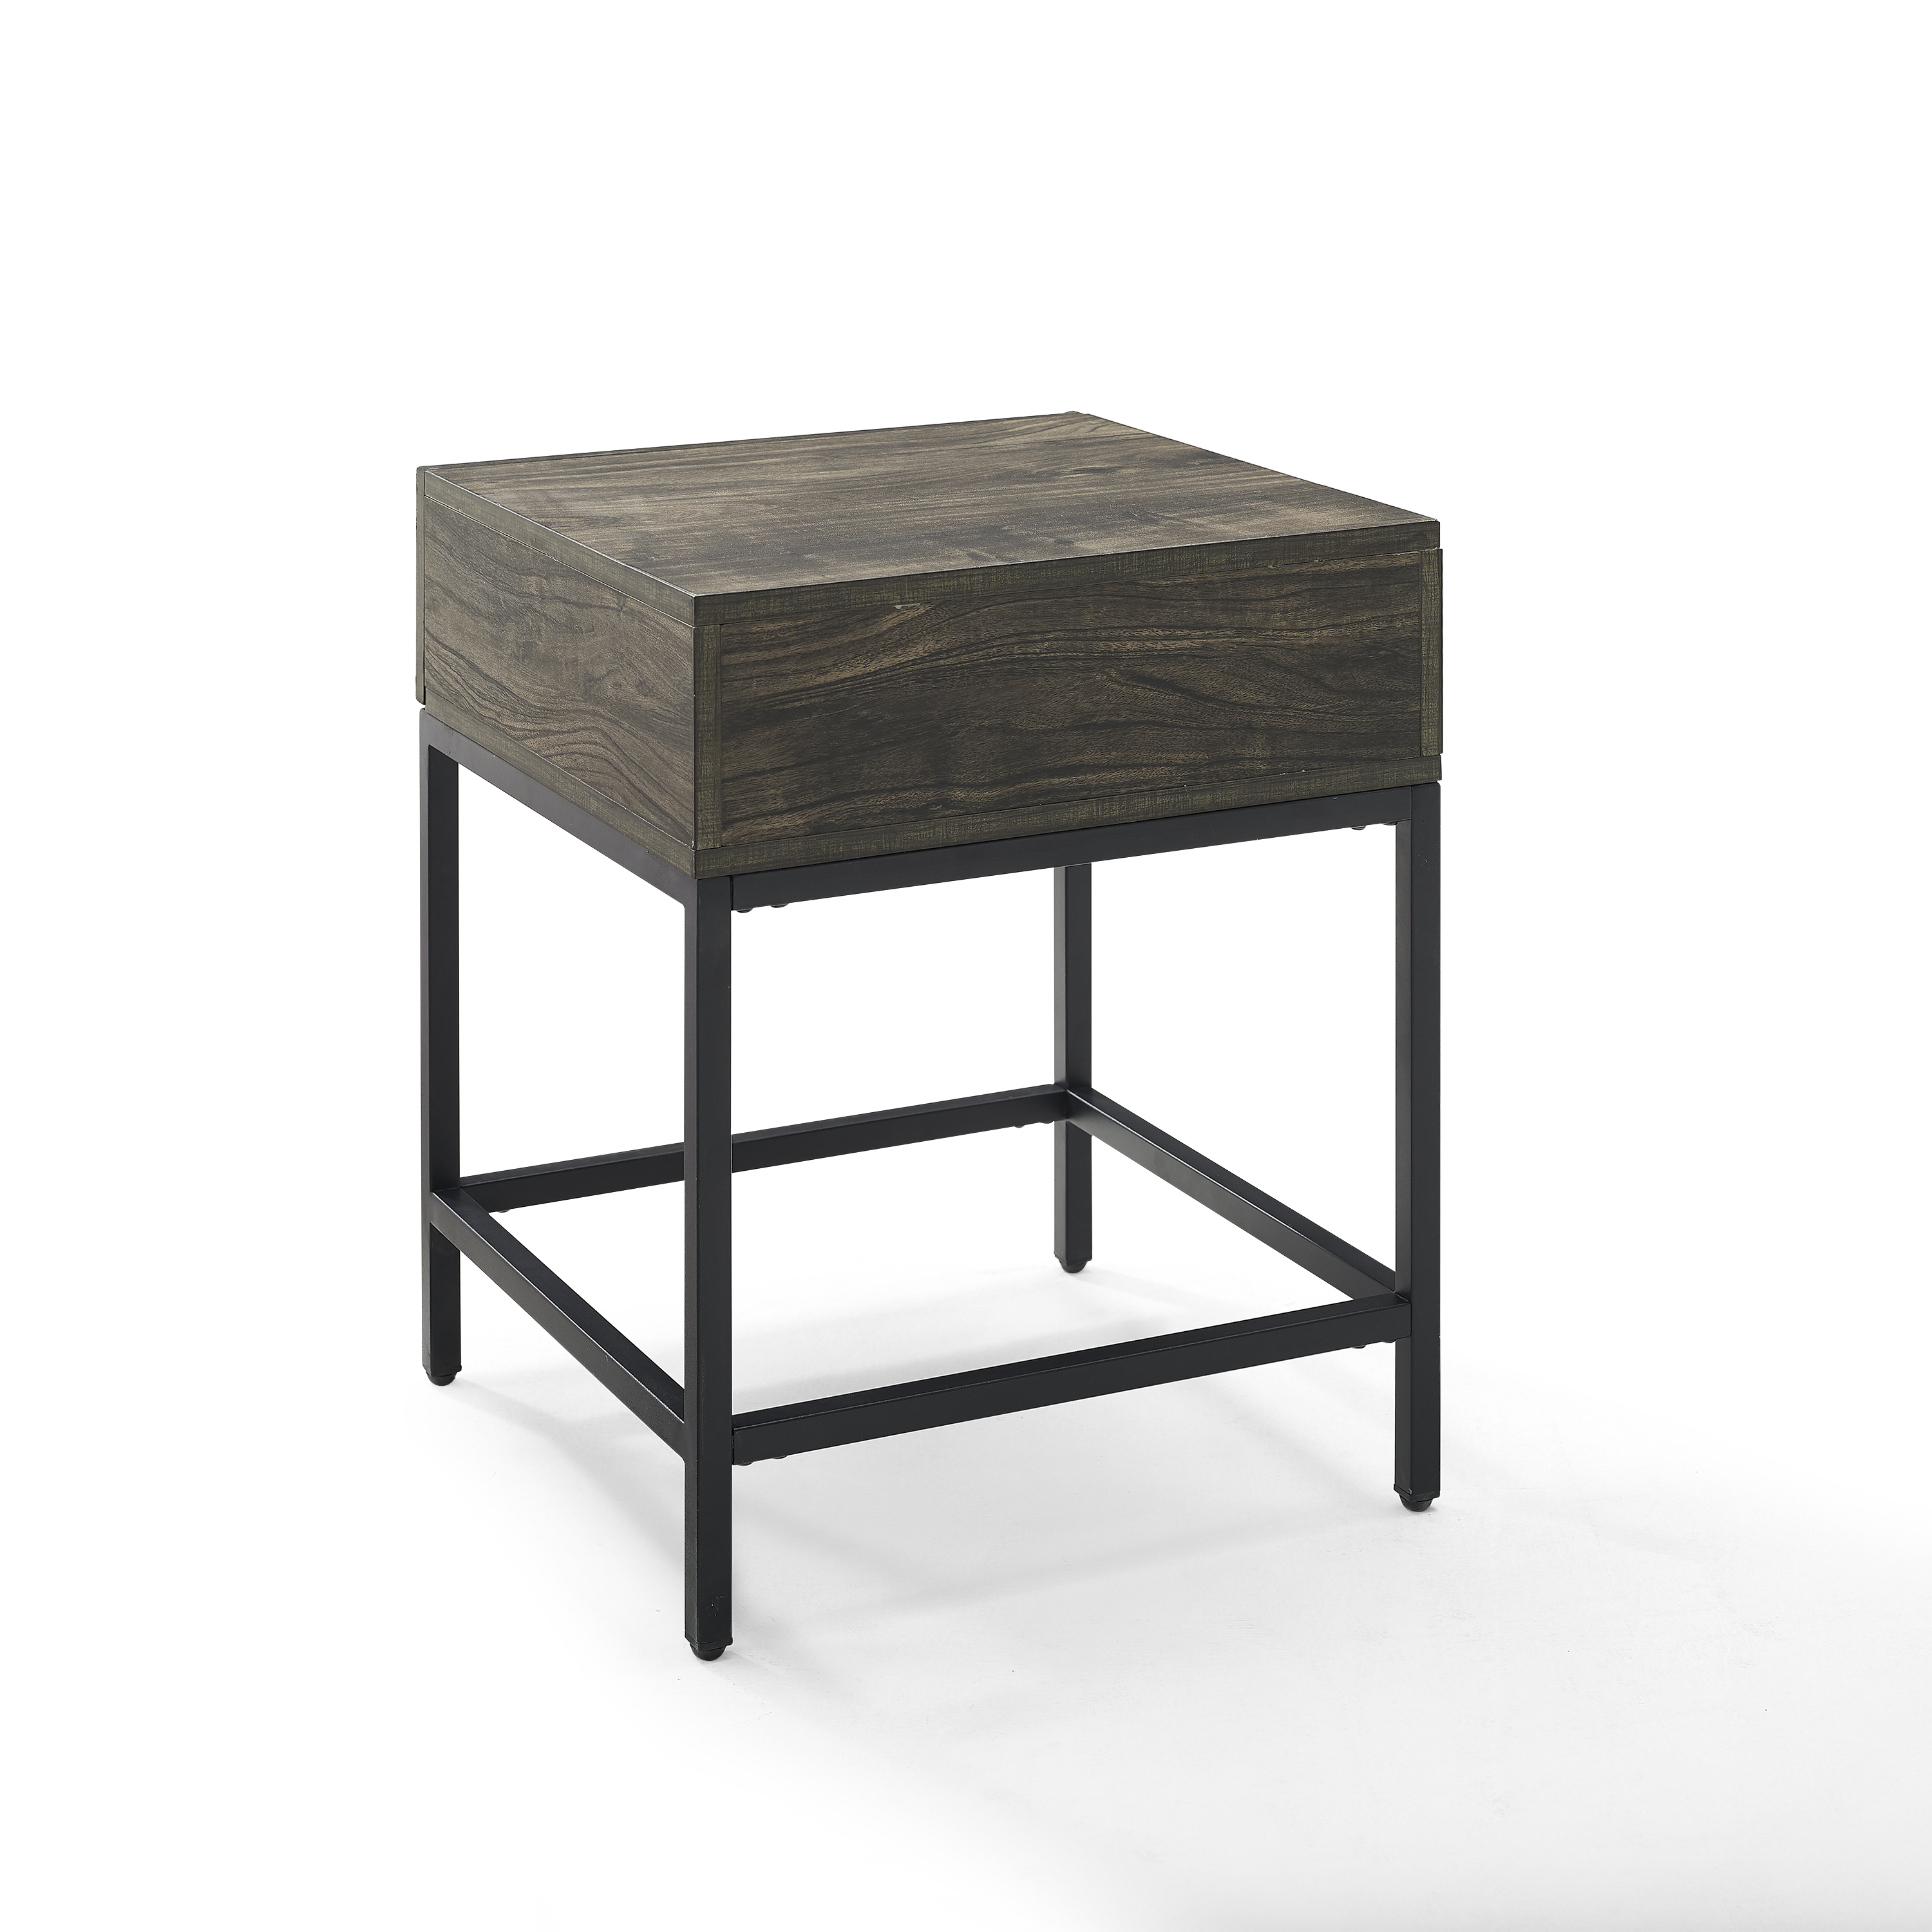 Crosley Jacobsen 1 Drawer End Table in Brown Ash - image 1 of 12